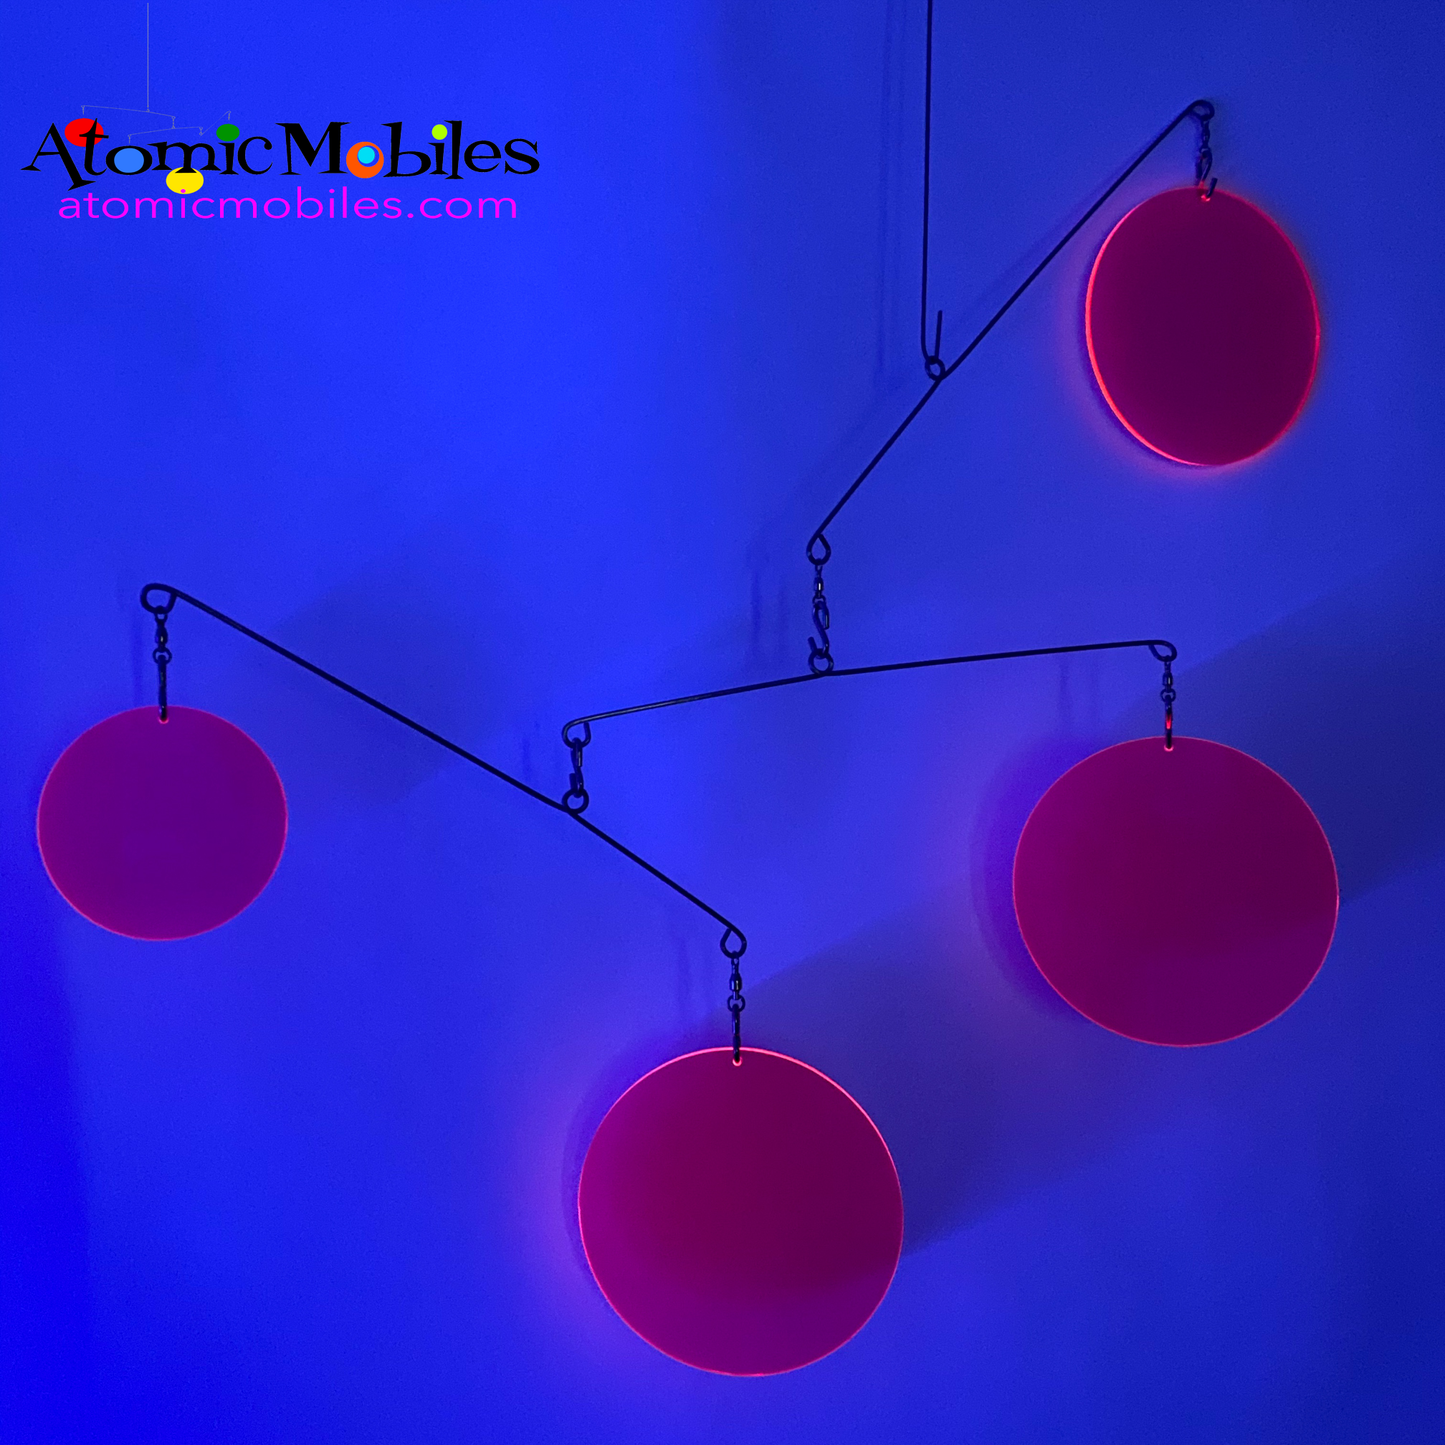 Neon Fluorescent Hot Pink Atomic Mobile under black light -  hanging modern kinetic art mobiles by AtomicMobiles.com